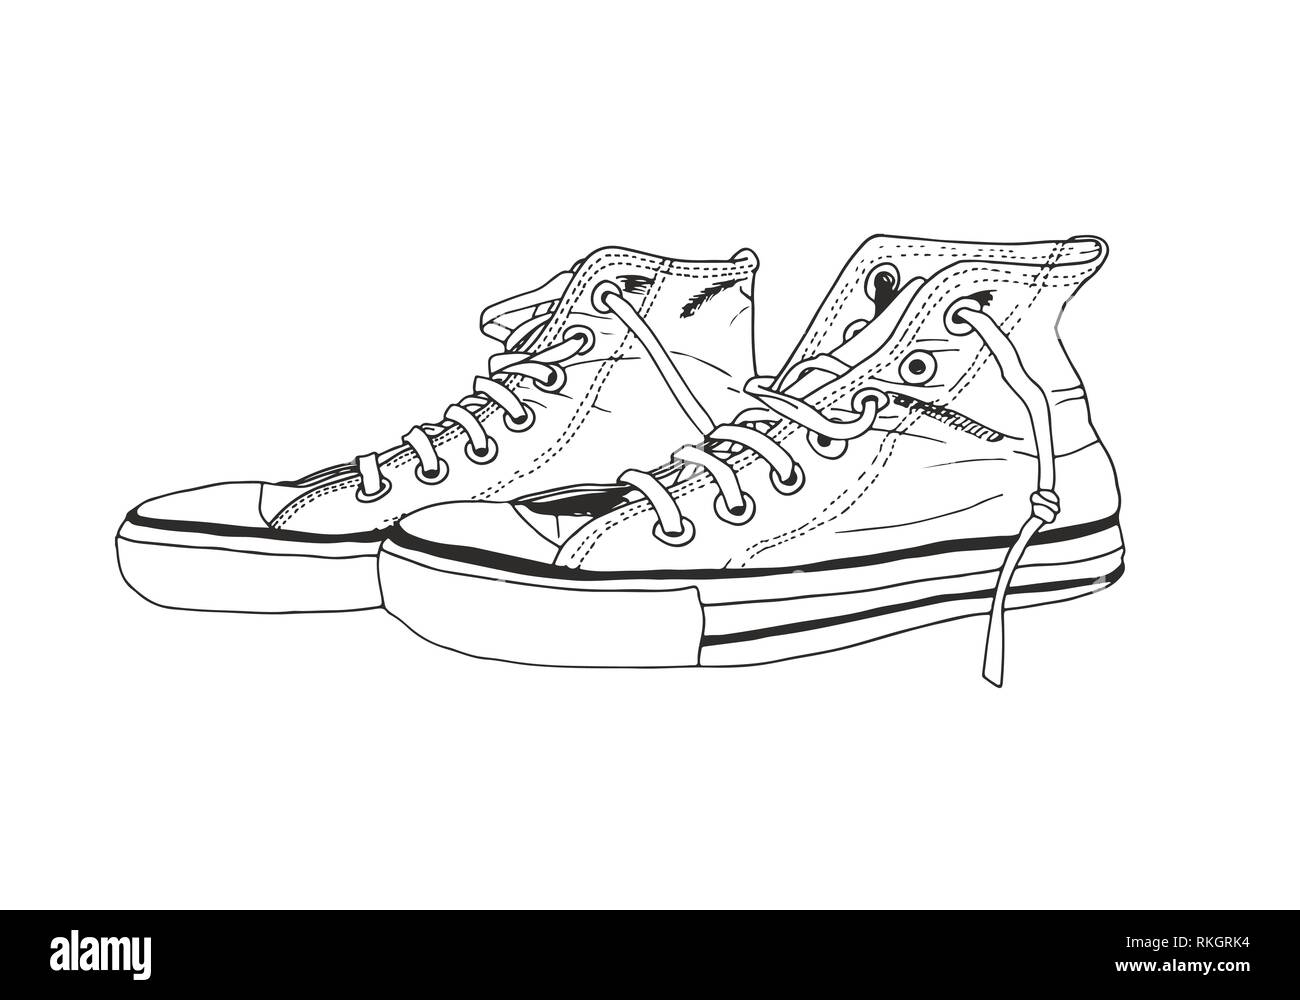 Disegnata a mano hipster sneakers illustrazione vettoriale Illustrazione Vettoriale